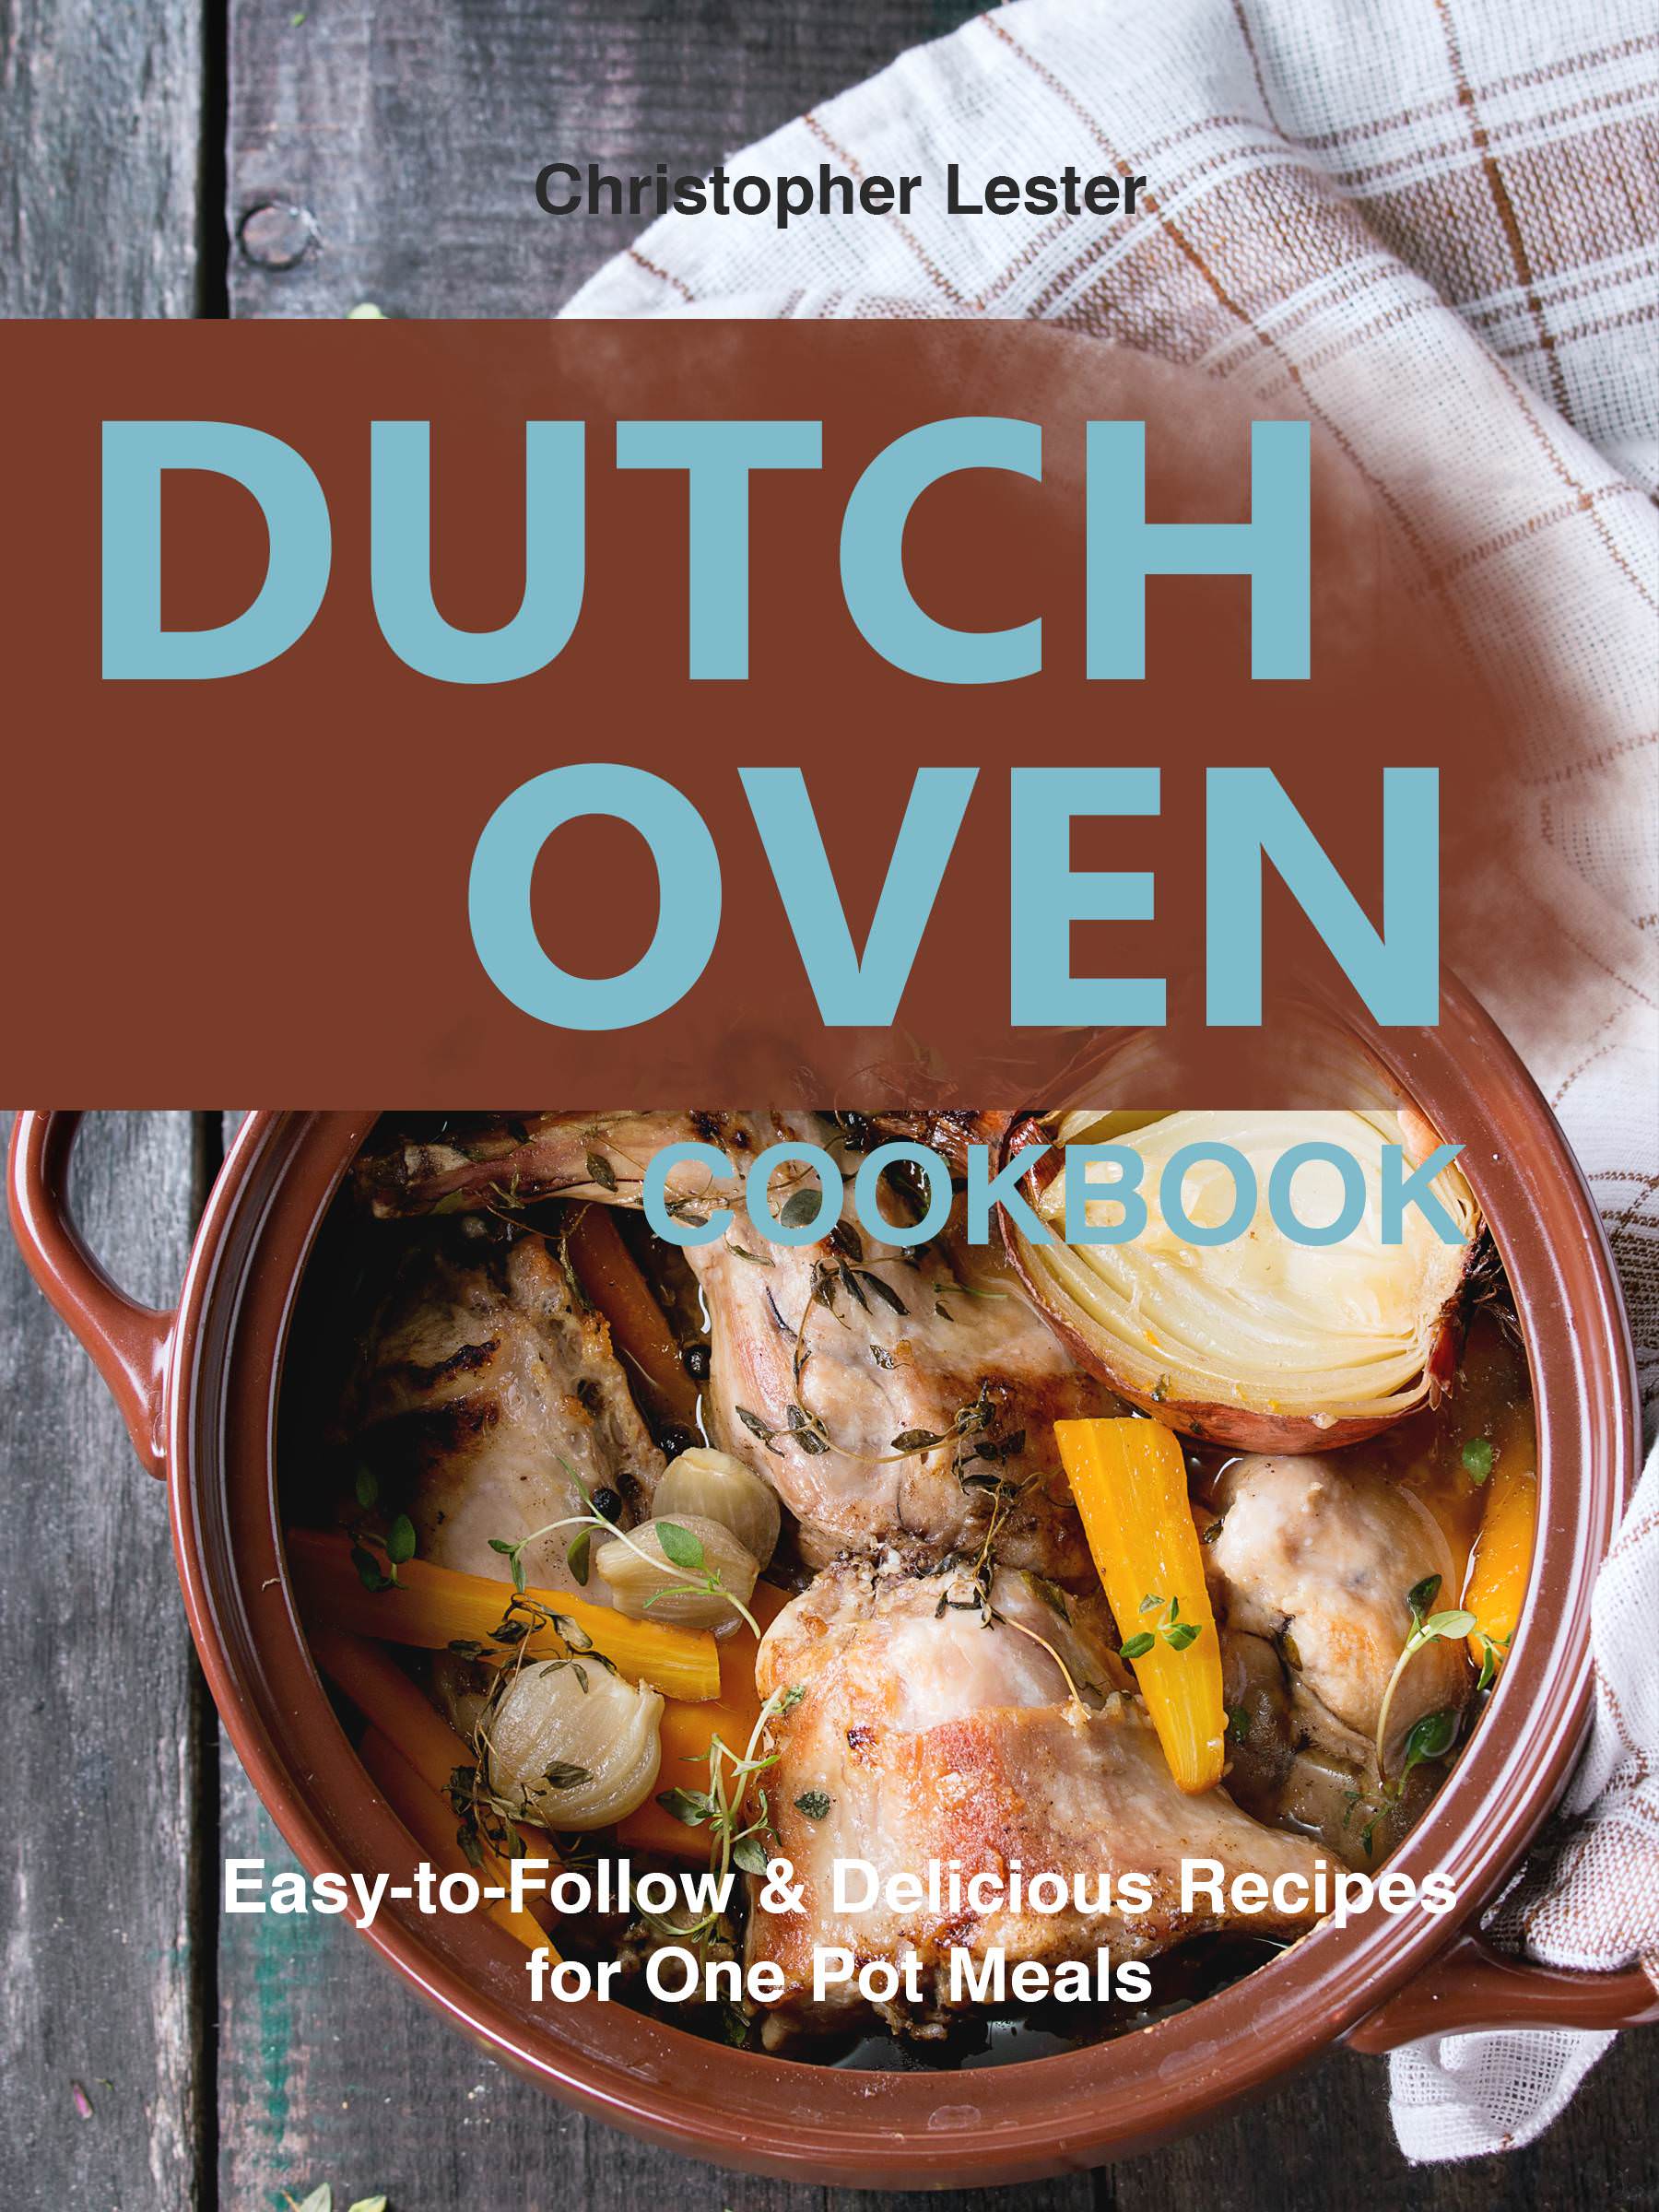 FREE: Dutch Oven Cookbook: Easy-to-Follow Delicious Recipes for One Pot Meals by Christopher Lester